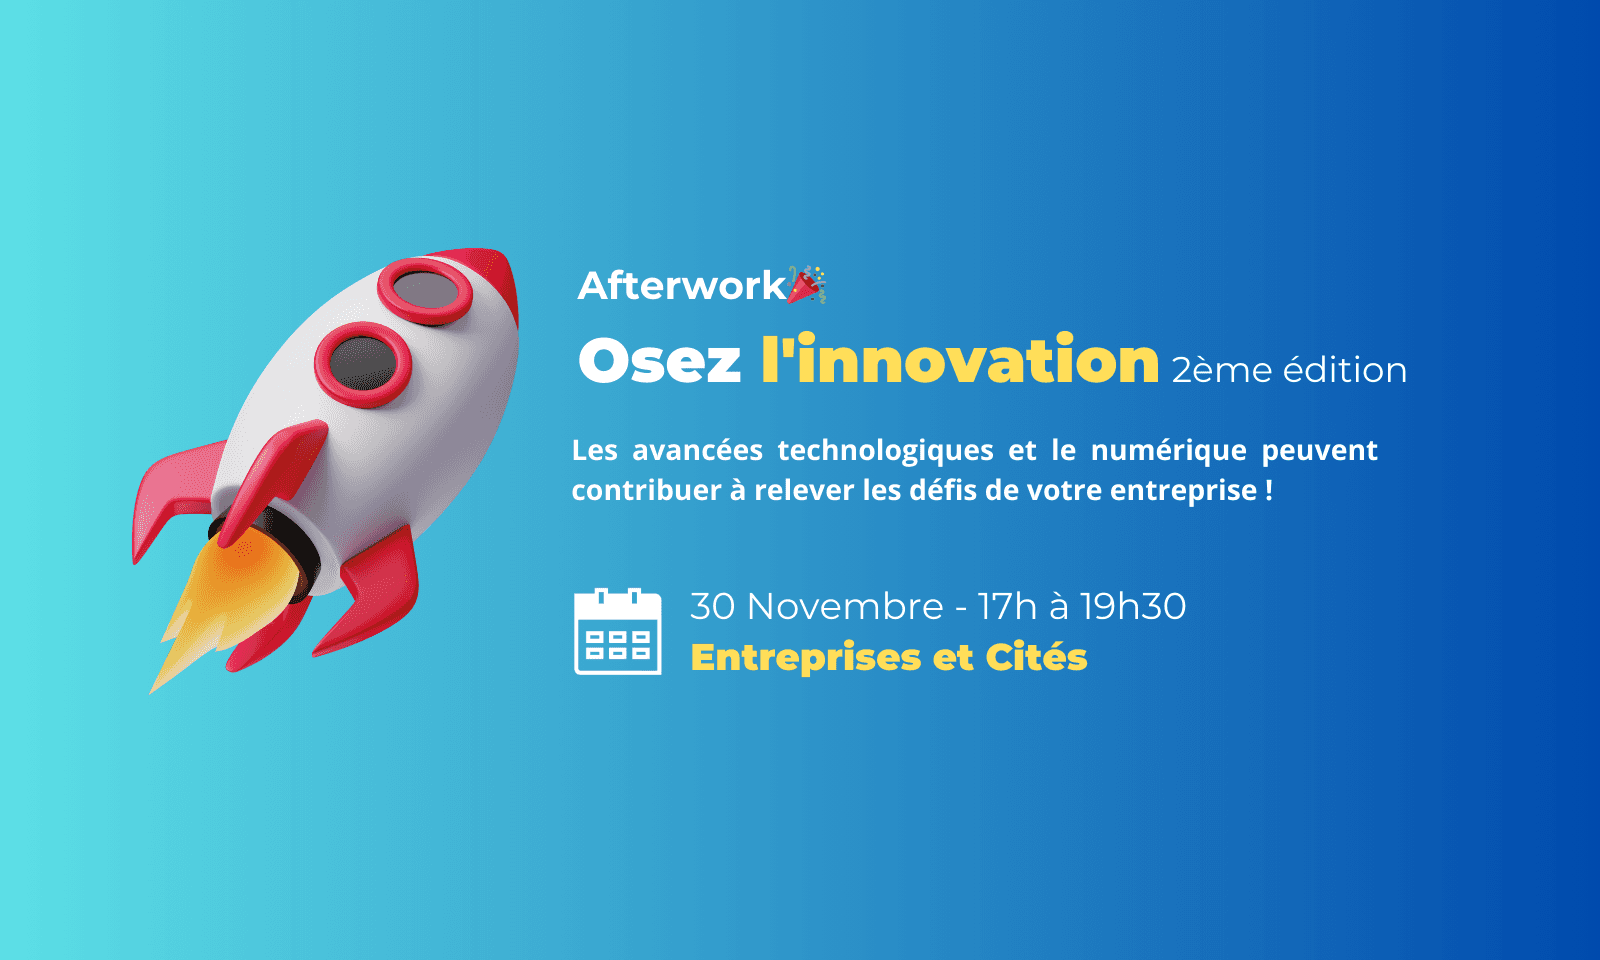 Afterwork: Dare to innovate! with Entreprises et cités and EuraTechnologies